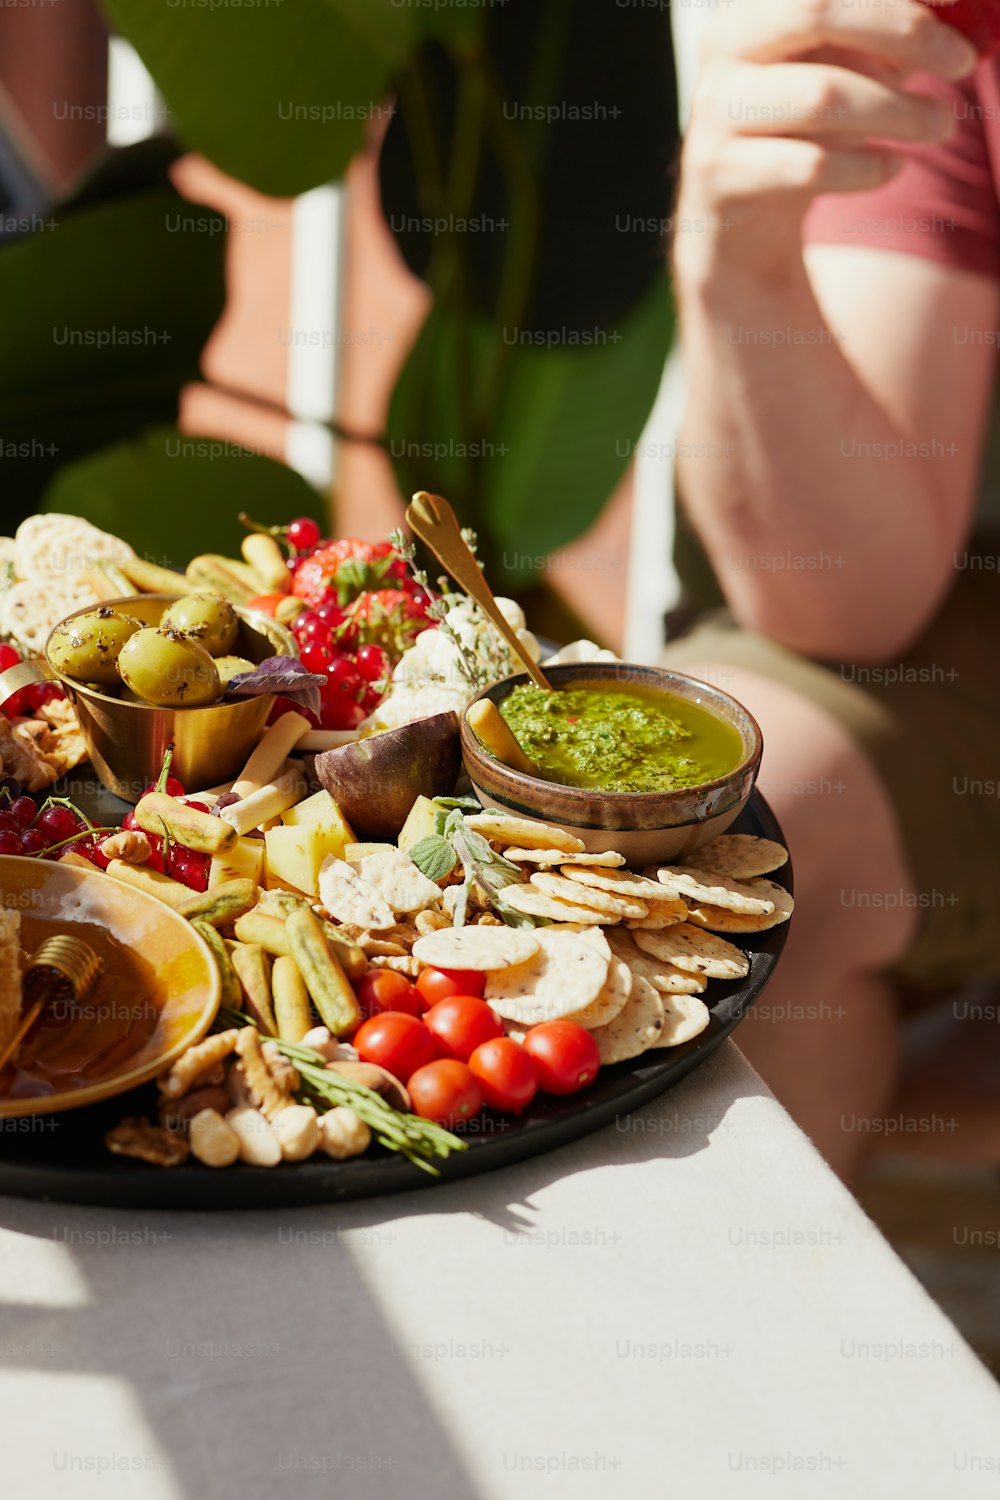 a platter of food on a table with a woman taking a picture of it